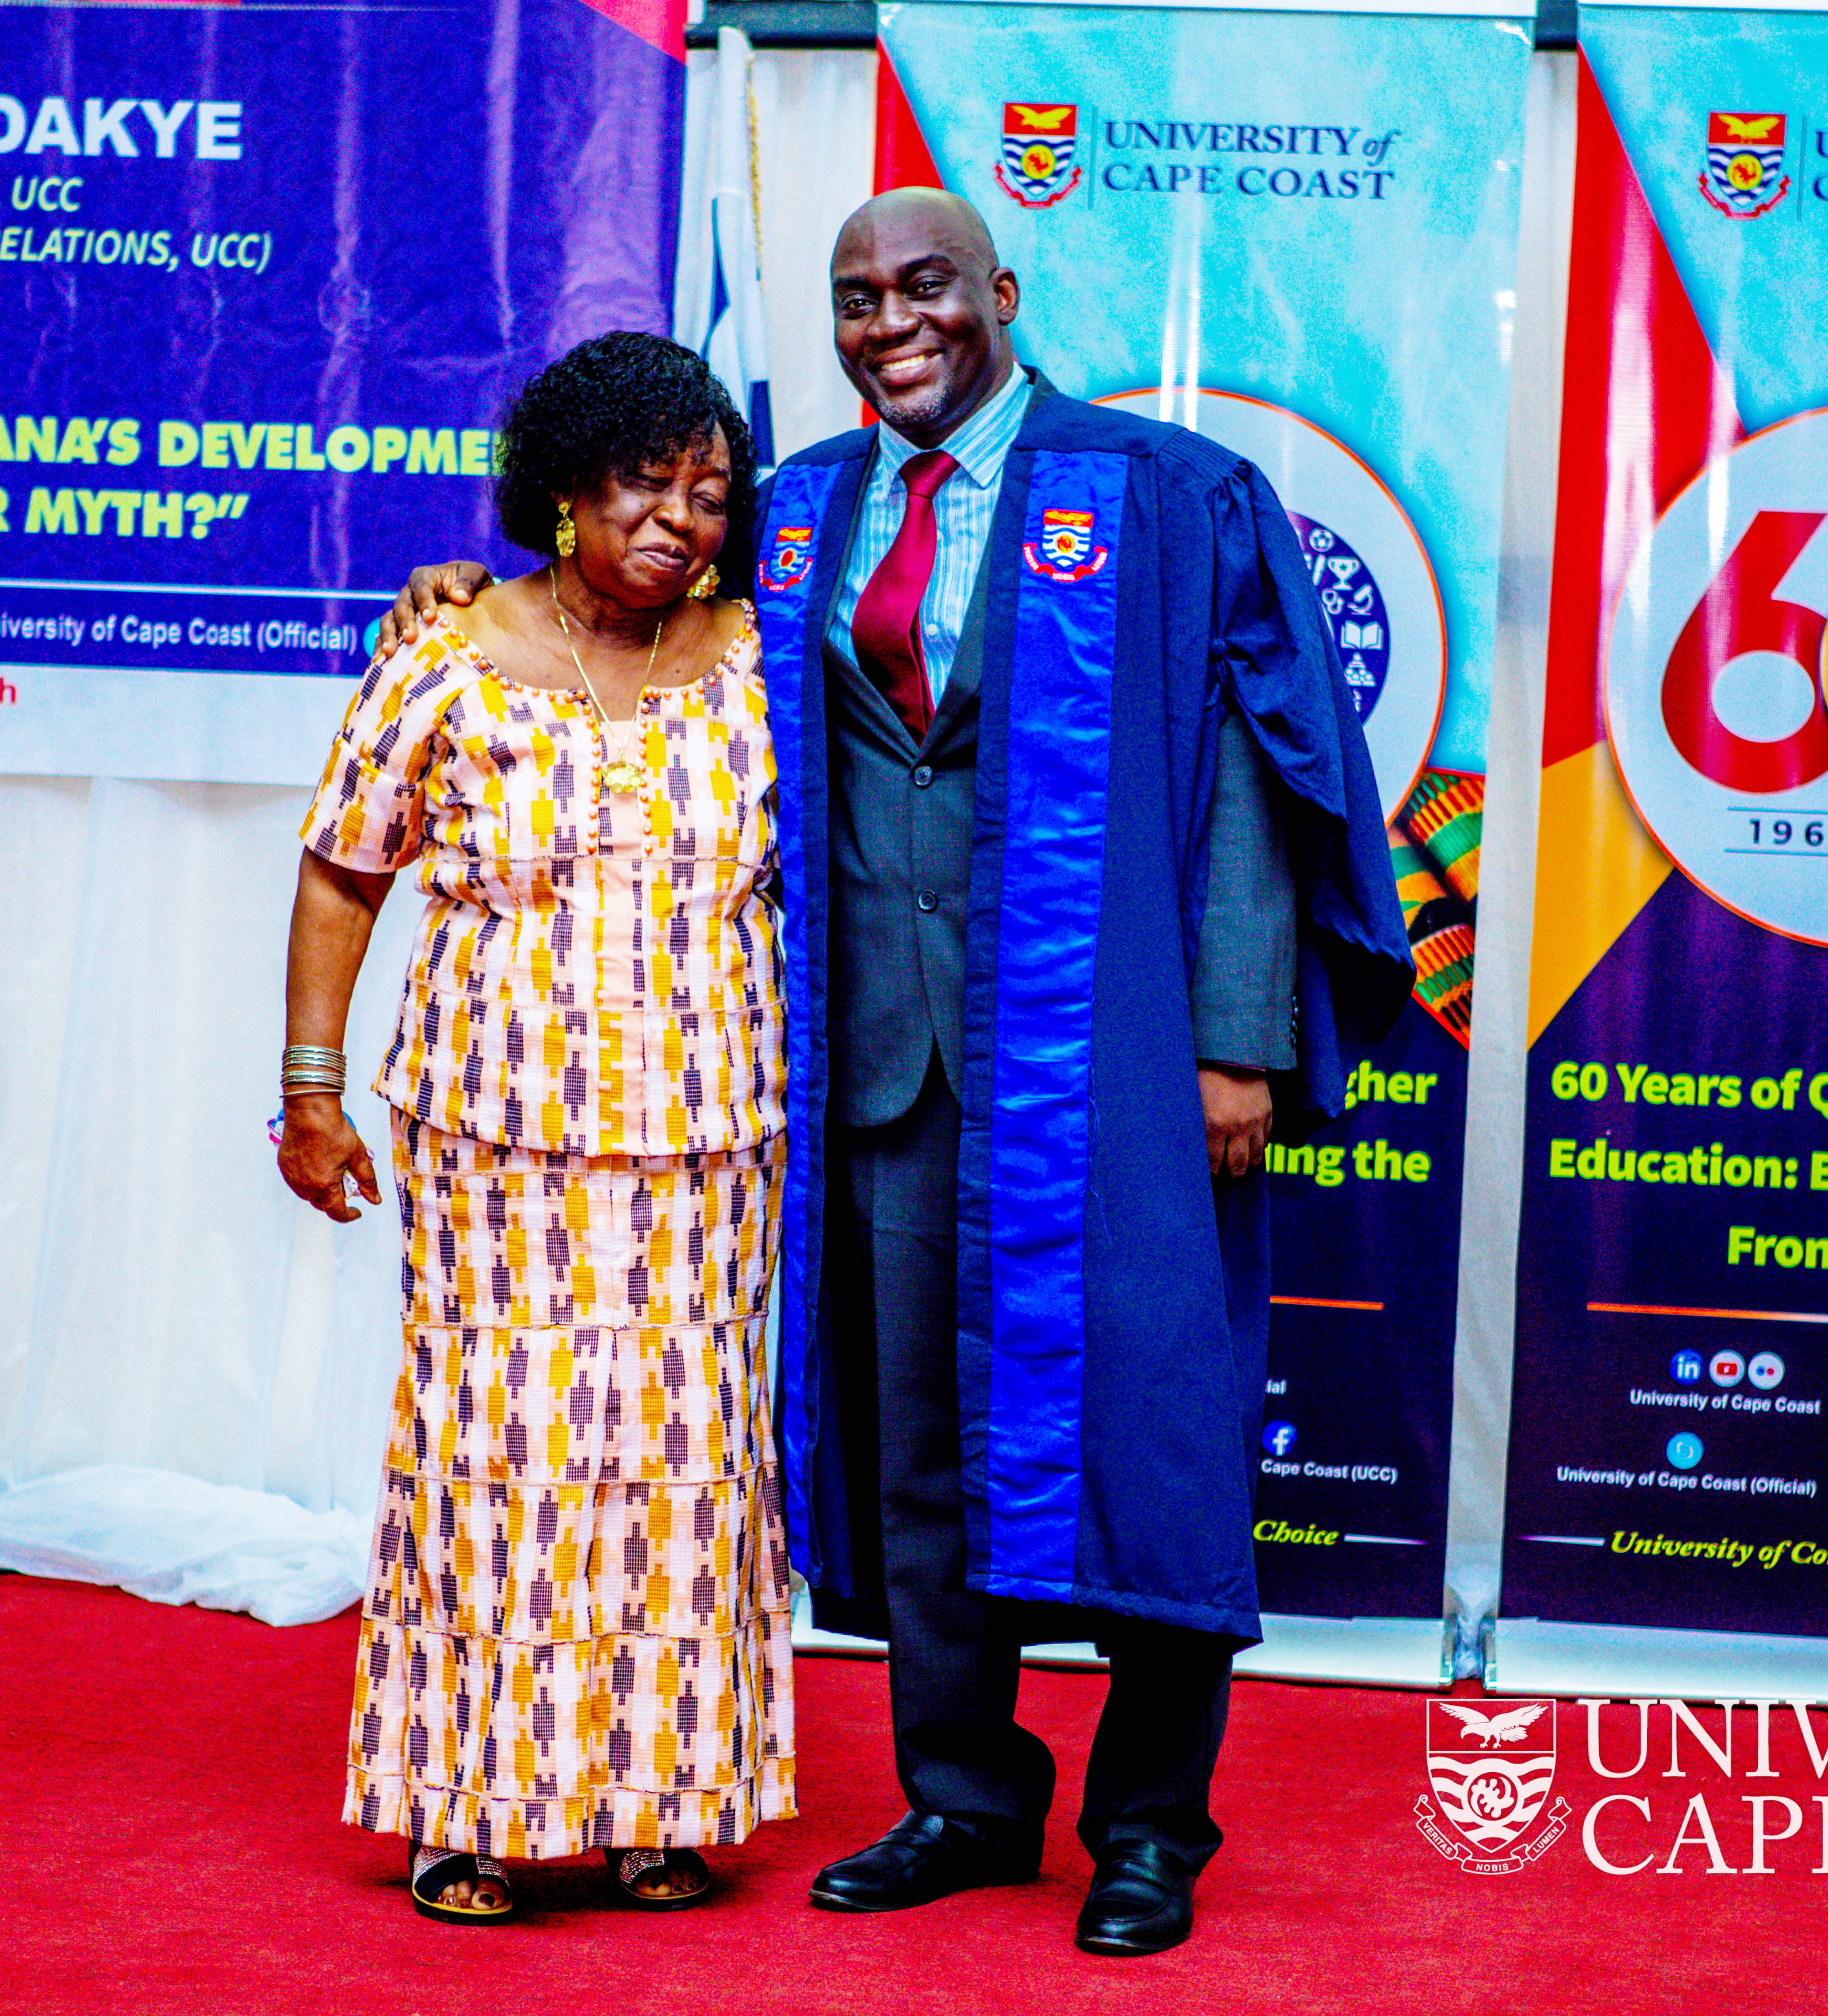 Prof. Boakye being congratulated by his mother after the lecture